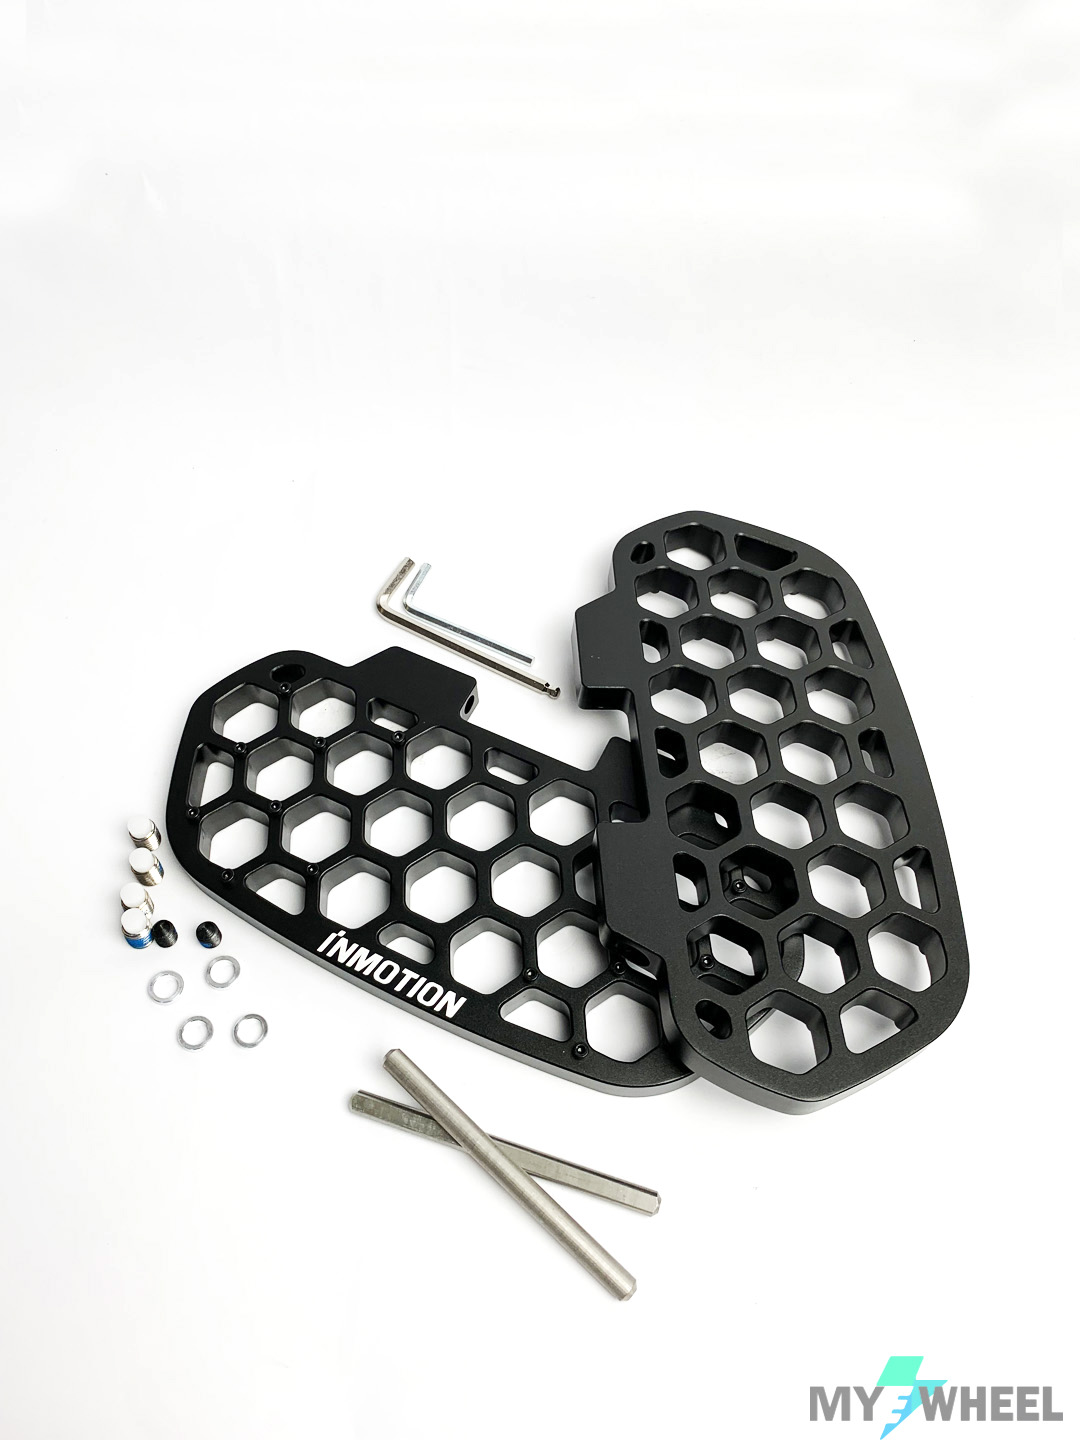 InMotion Honeycomb Pedals